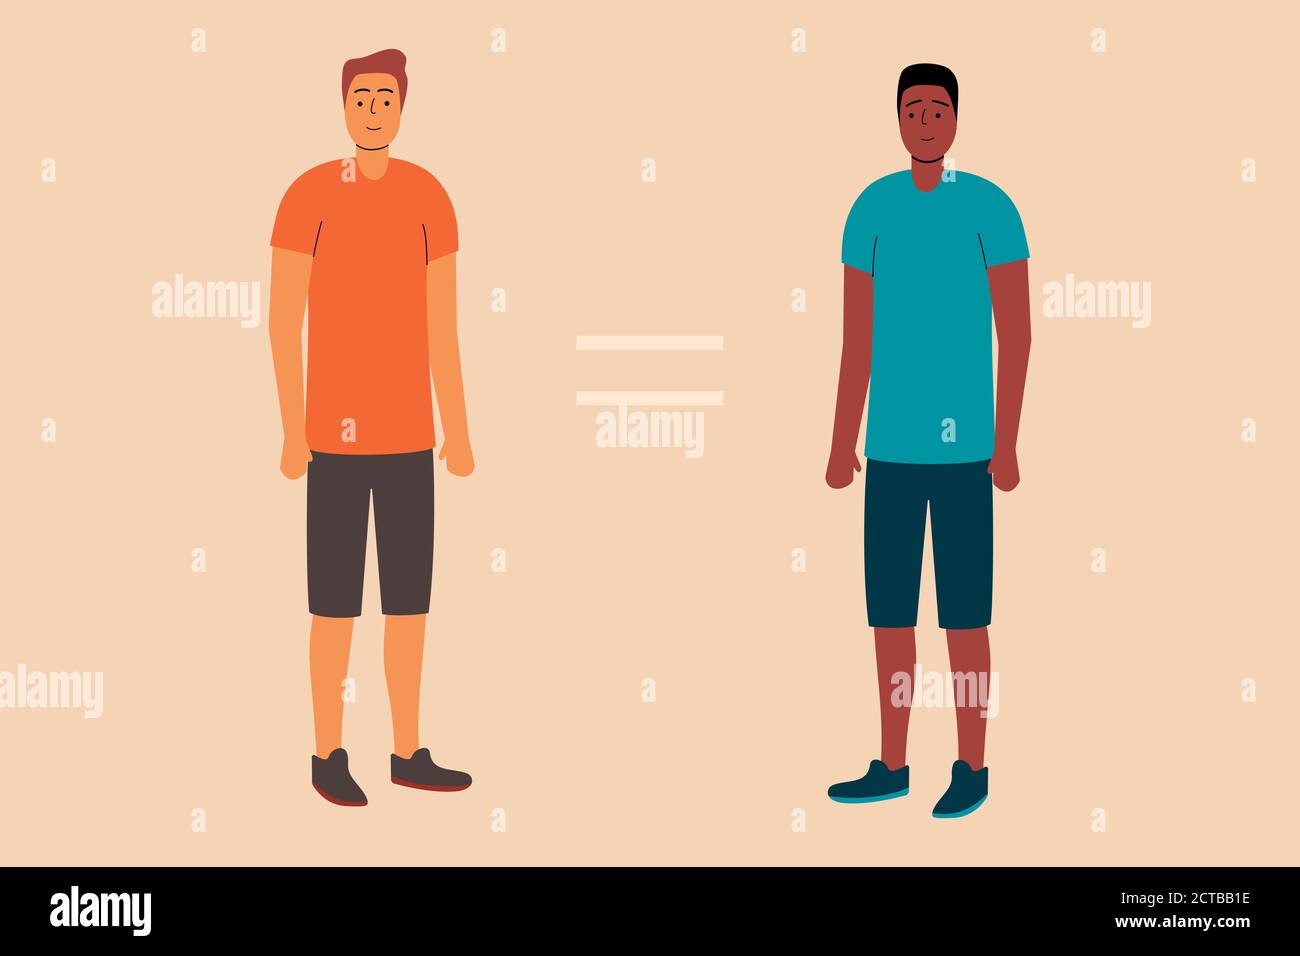 Racial equality concept illustration. One African American man near one white skin Caucasian man, equal sign between them. Flat design. Stock Photo